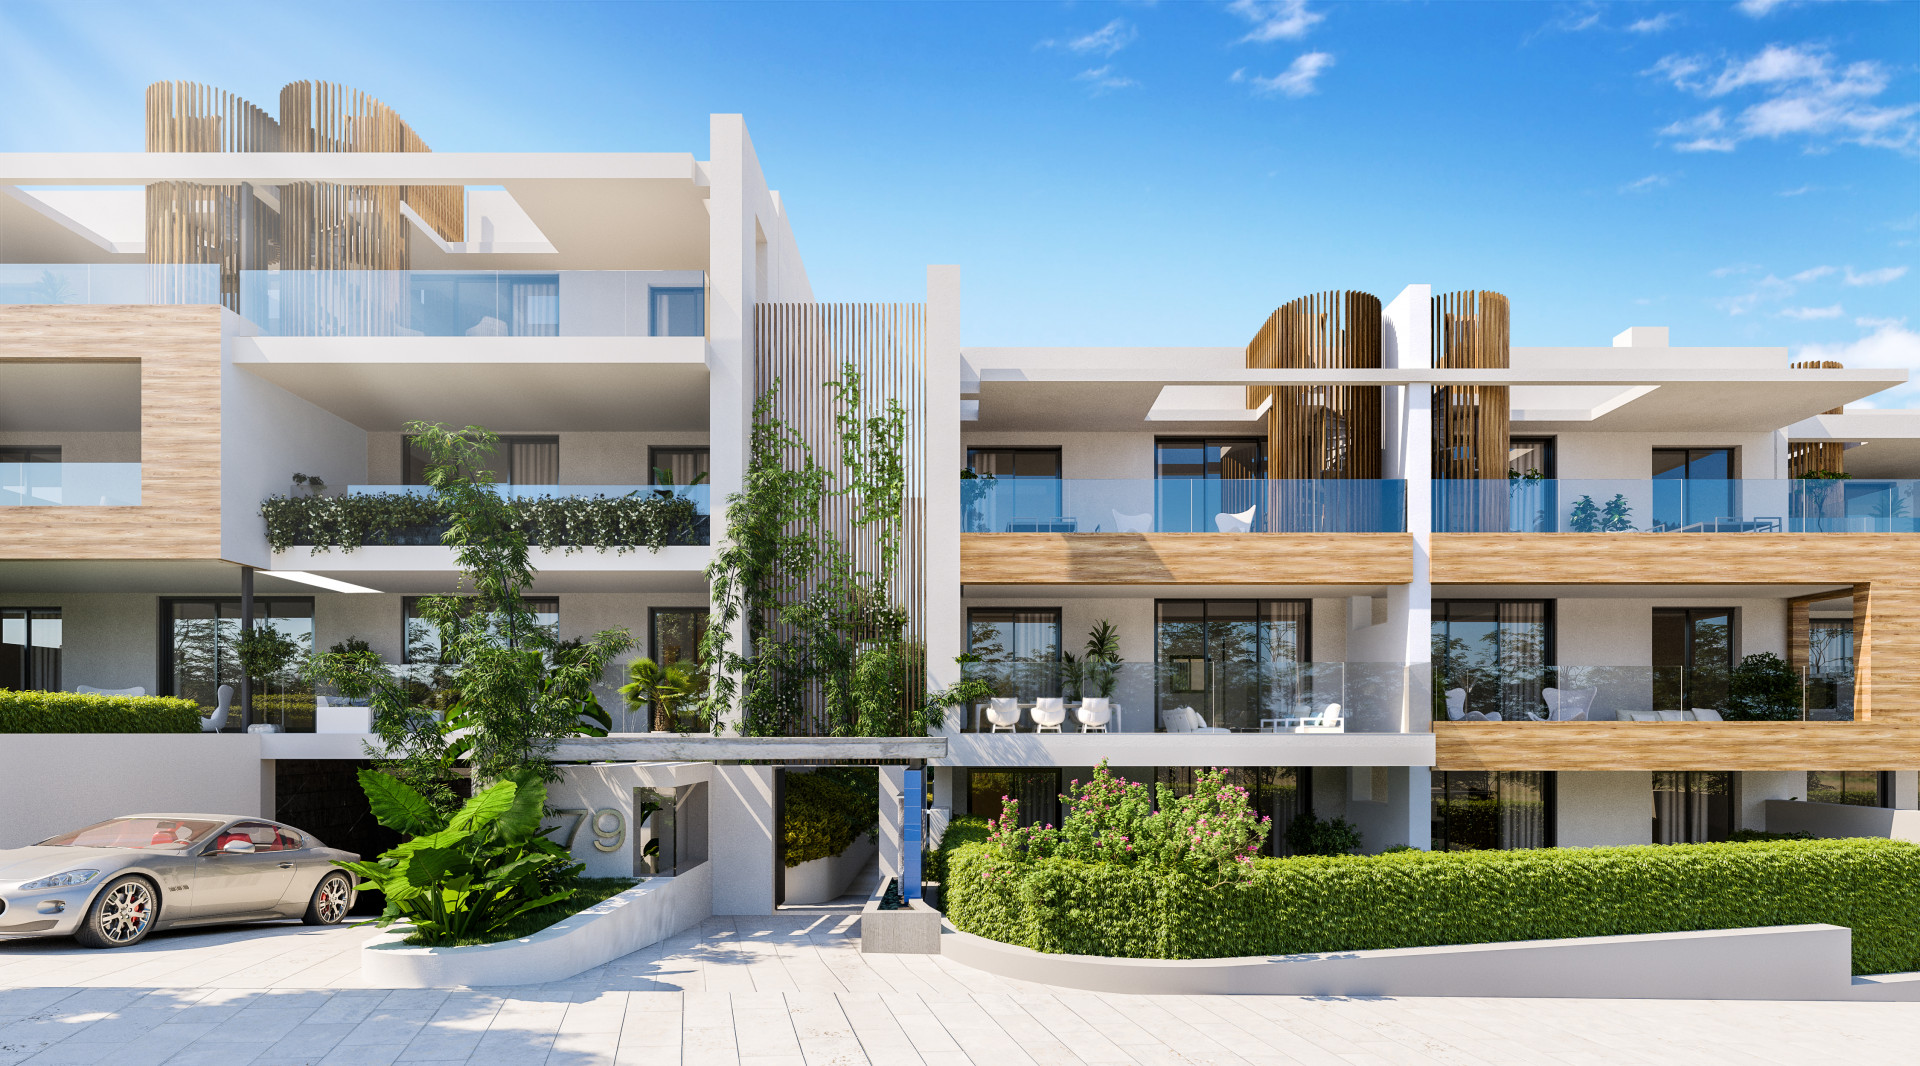 New project of modern apartments, penthouses and townhouses for sale in Fuengirola